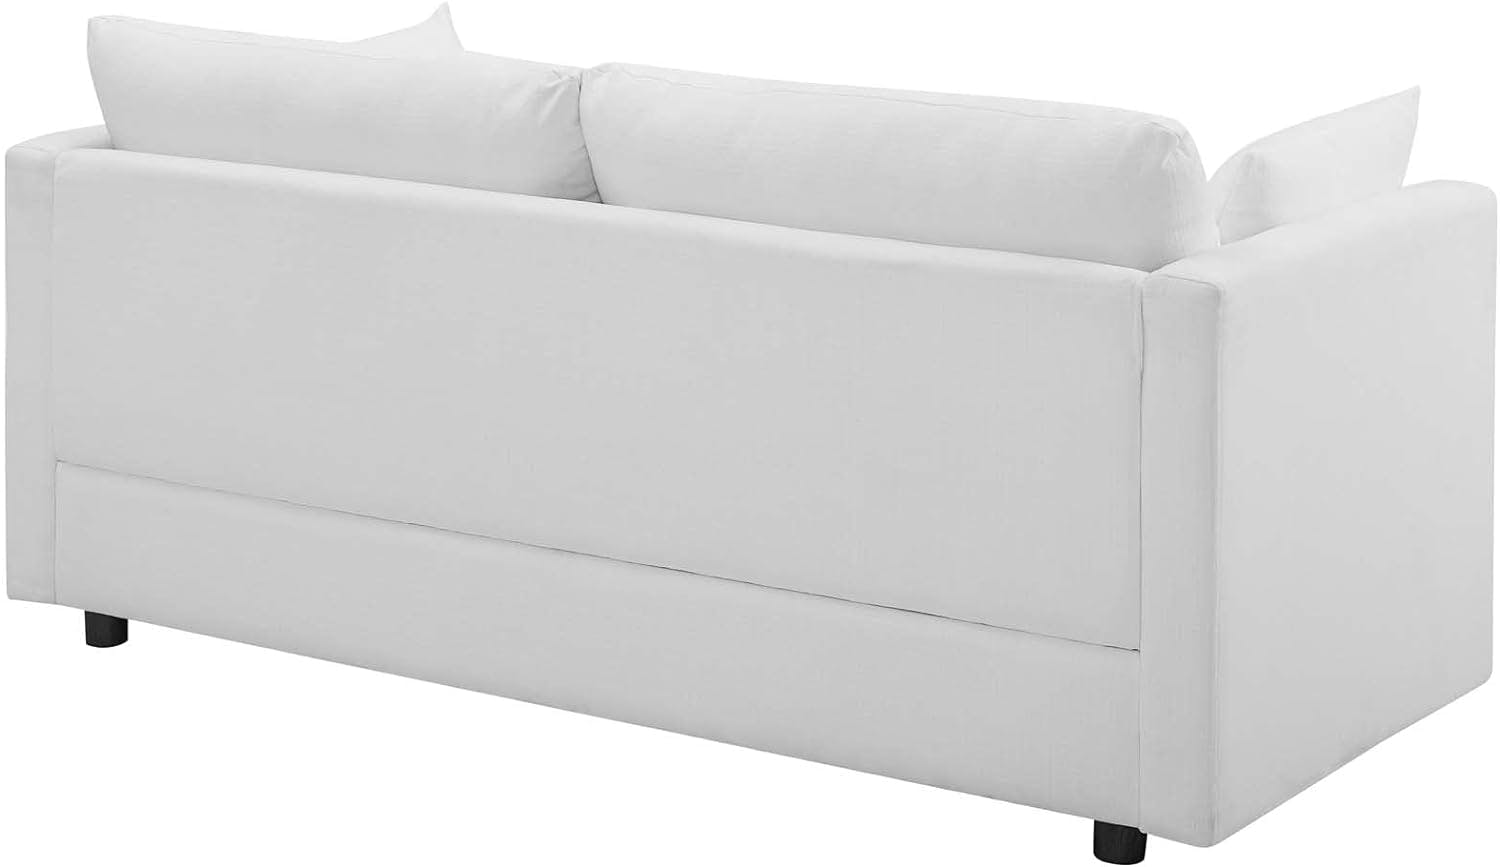 Sublime Comfort White Polyester 70" Tuxedo Sofa with Wood Accents